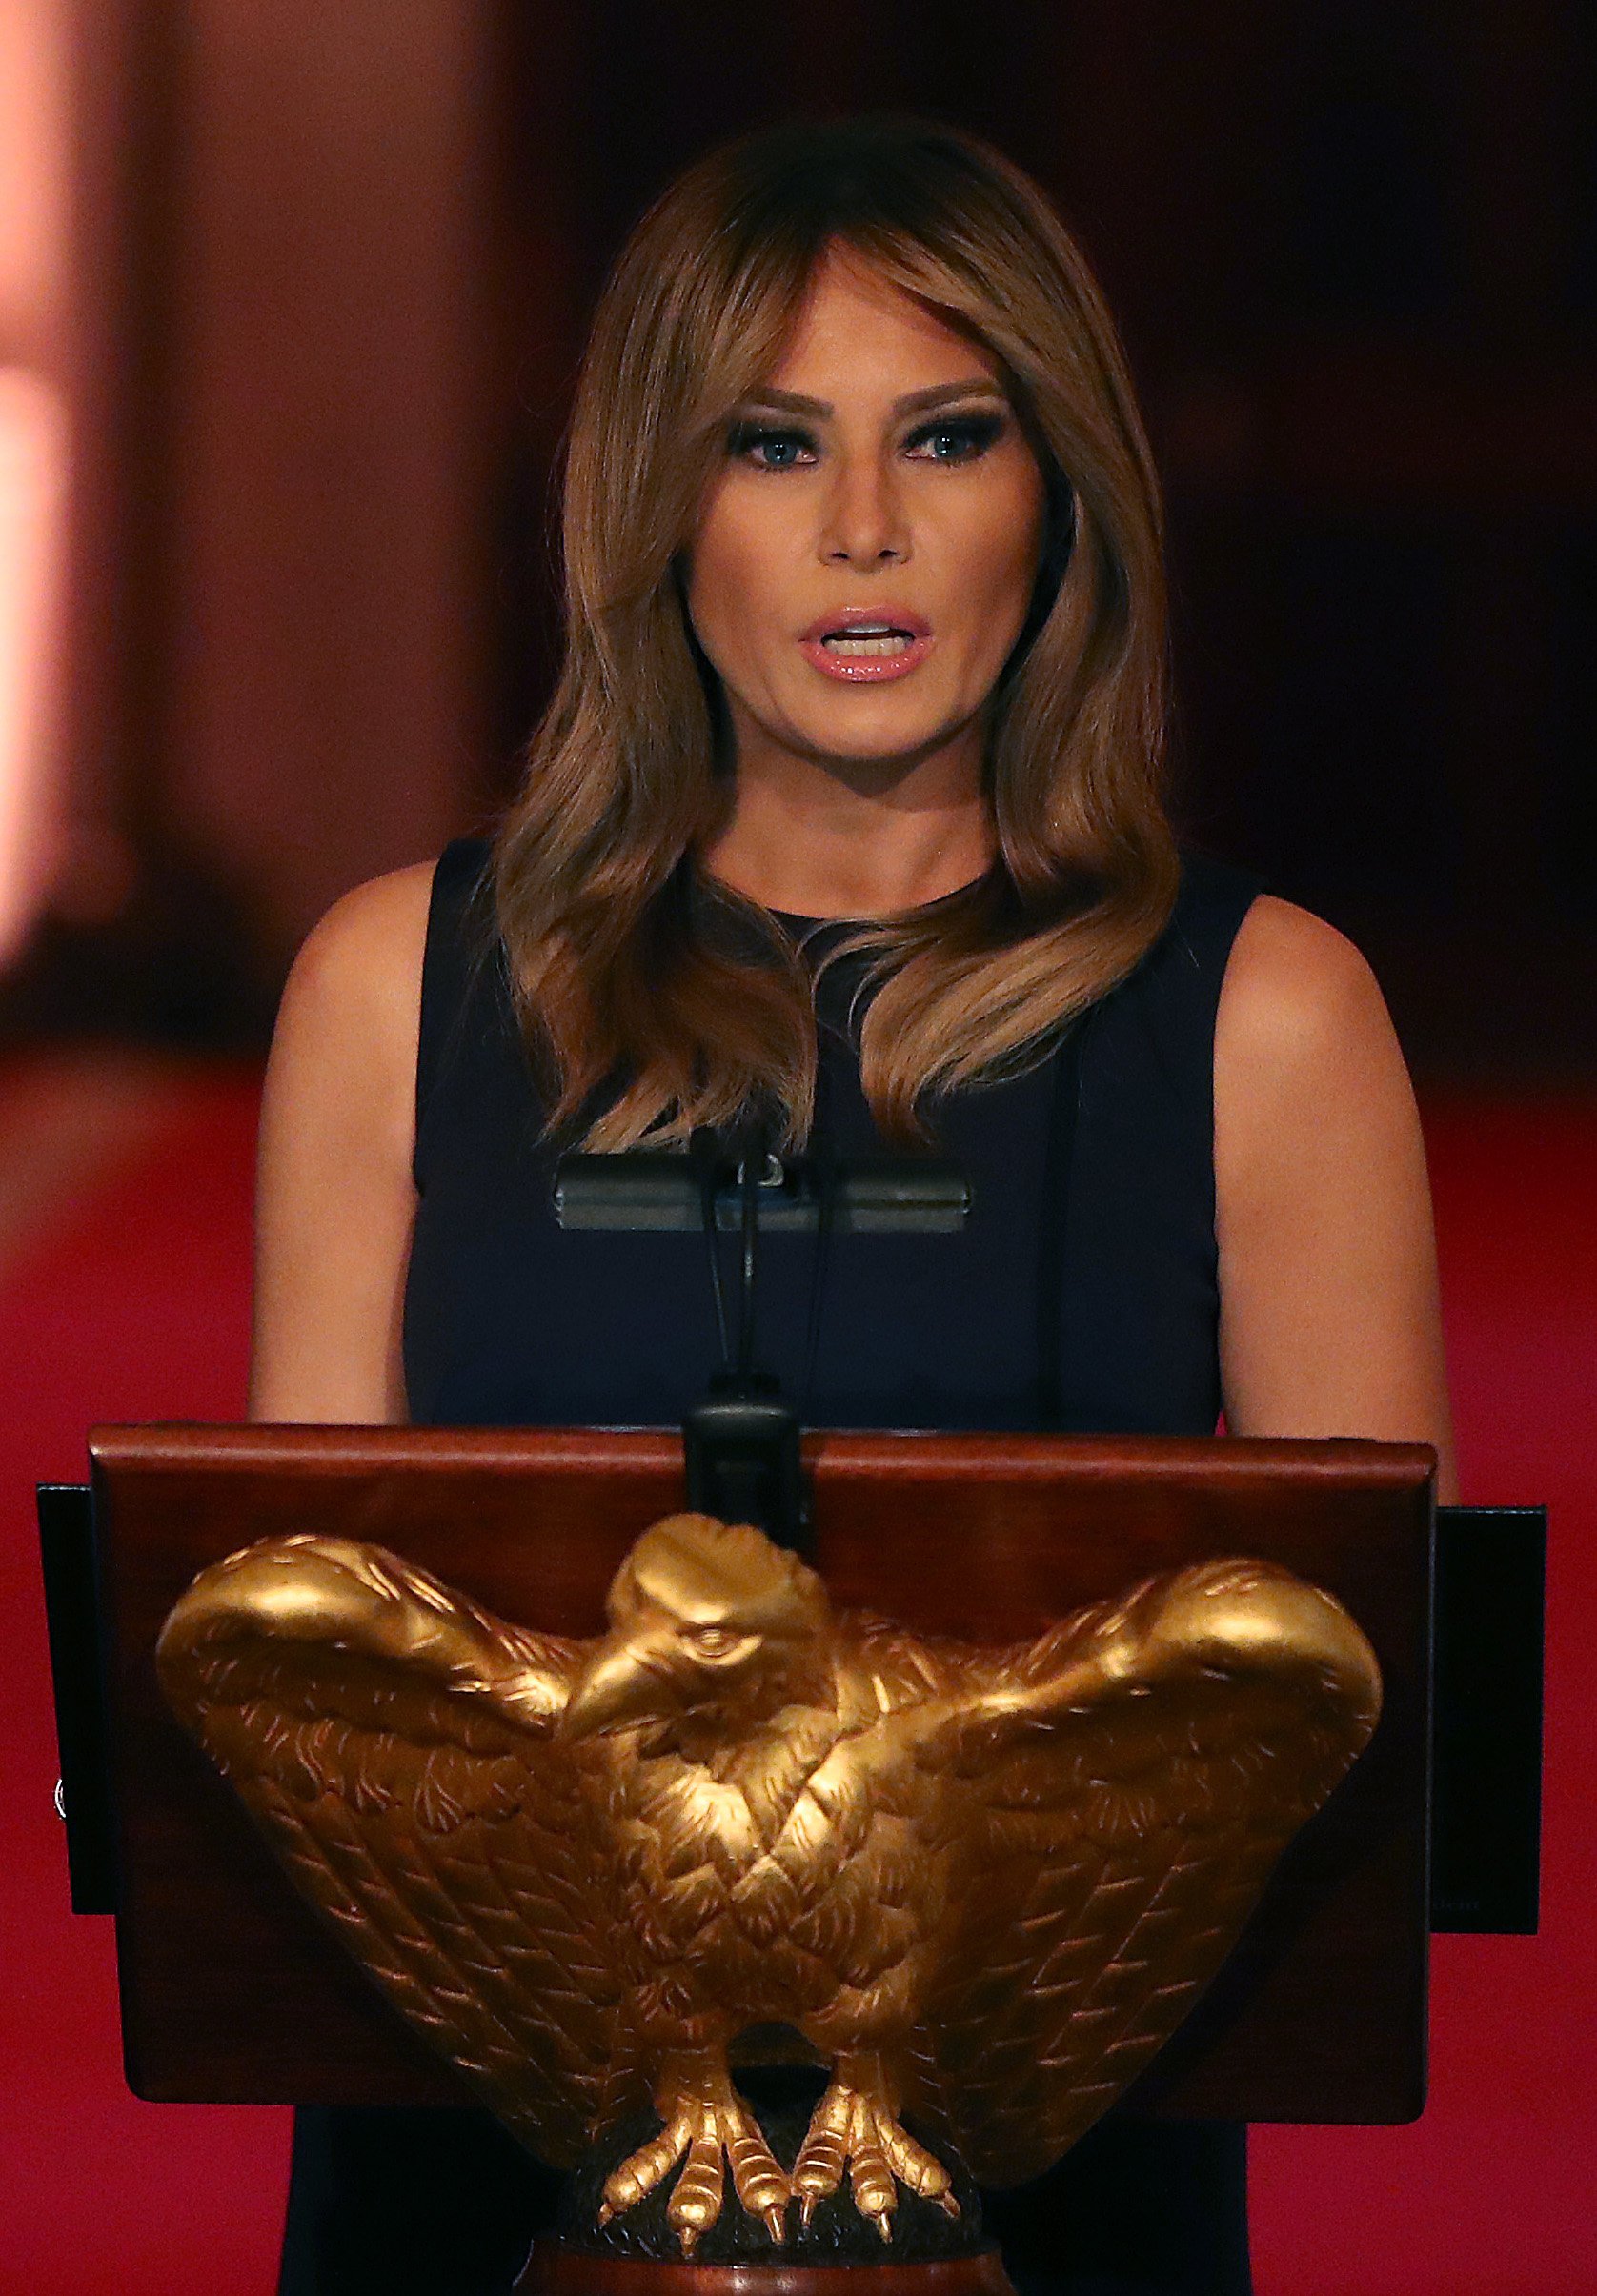 Melania Trump speaks during the White House Historical Association Dinner in the East Room of the White House on May 15, 2019, in Washington, DC. | Source: Getty Images.